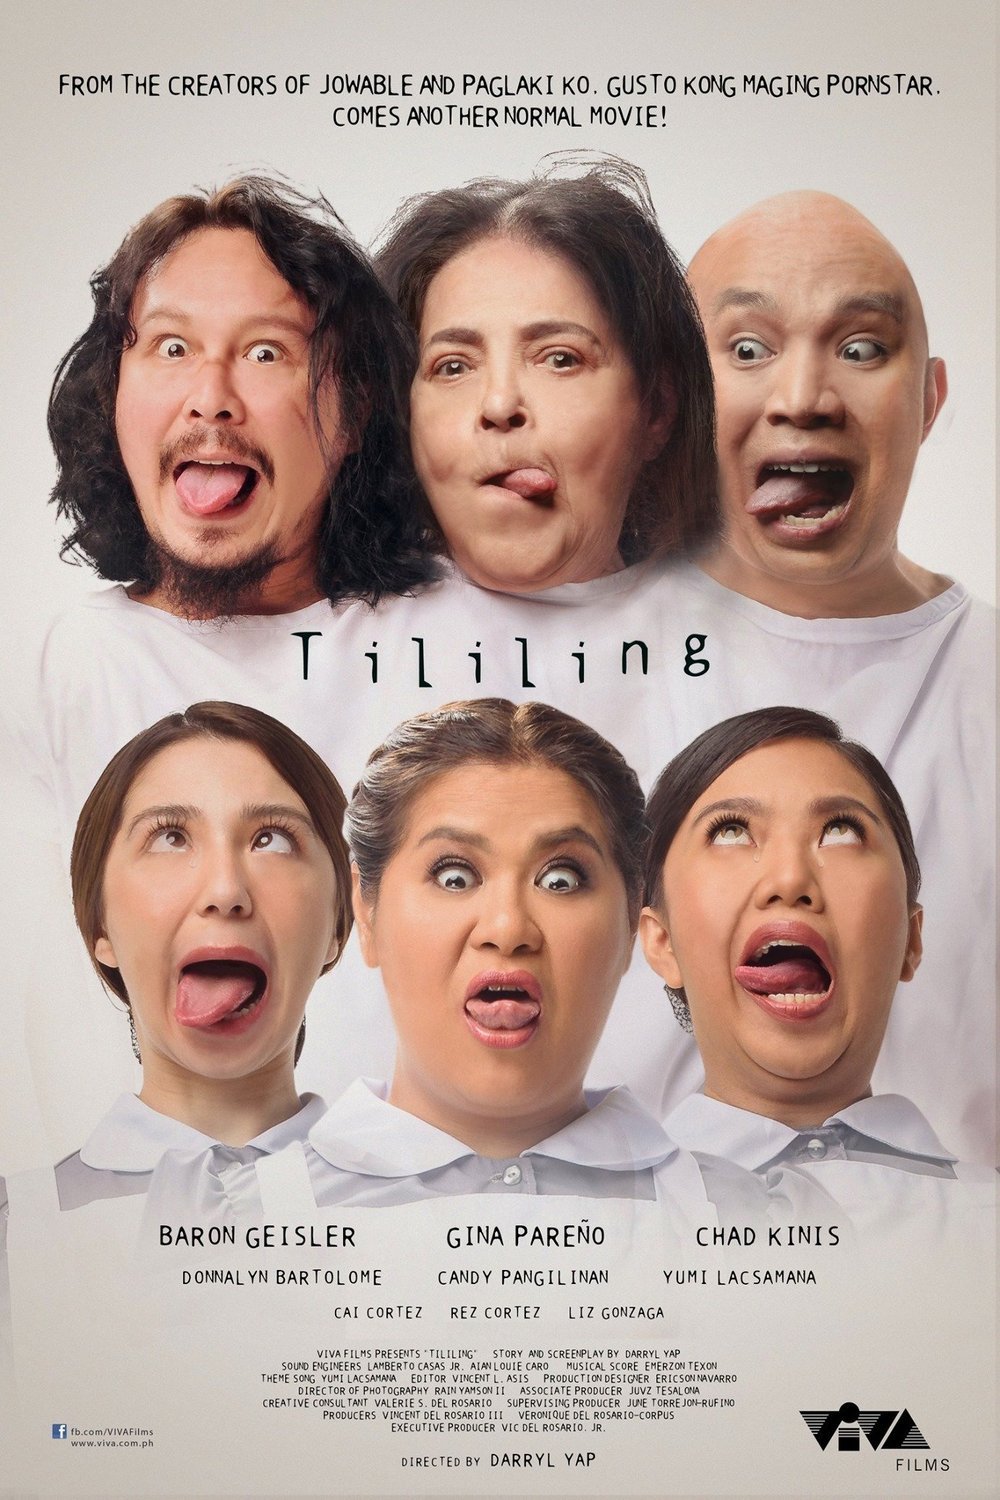 Tagalog poster of the movie Tililing